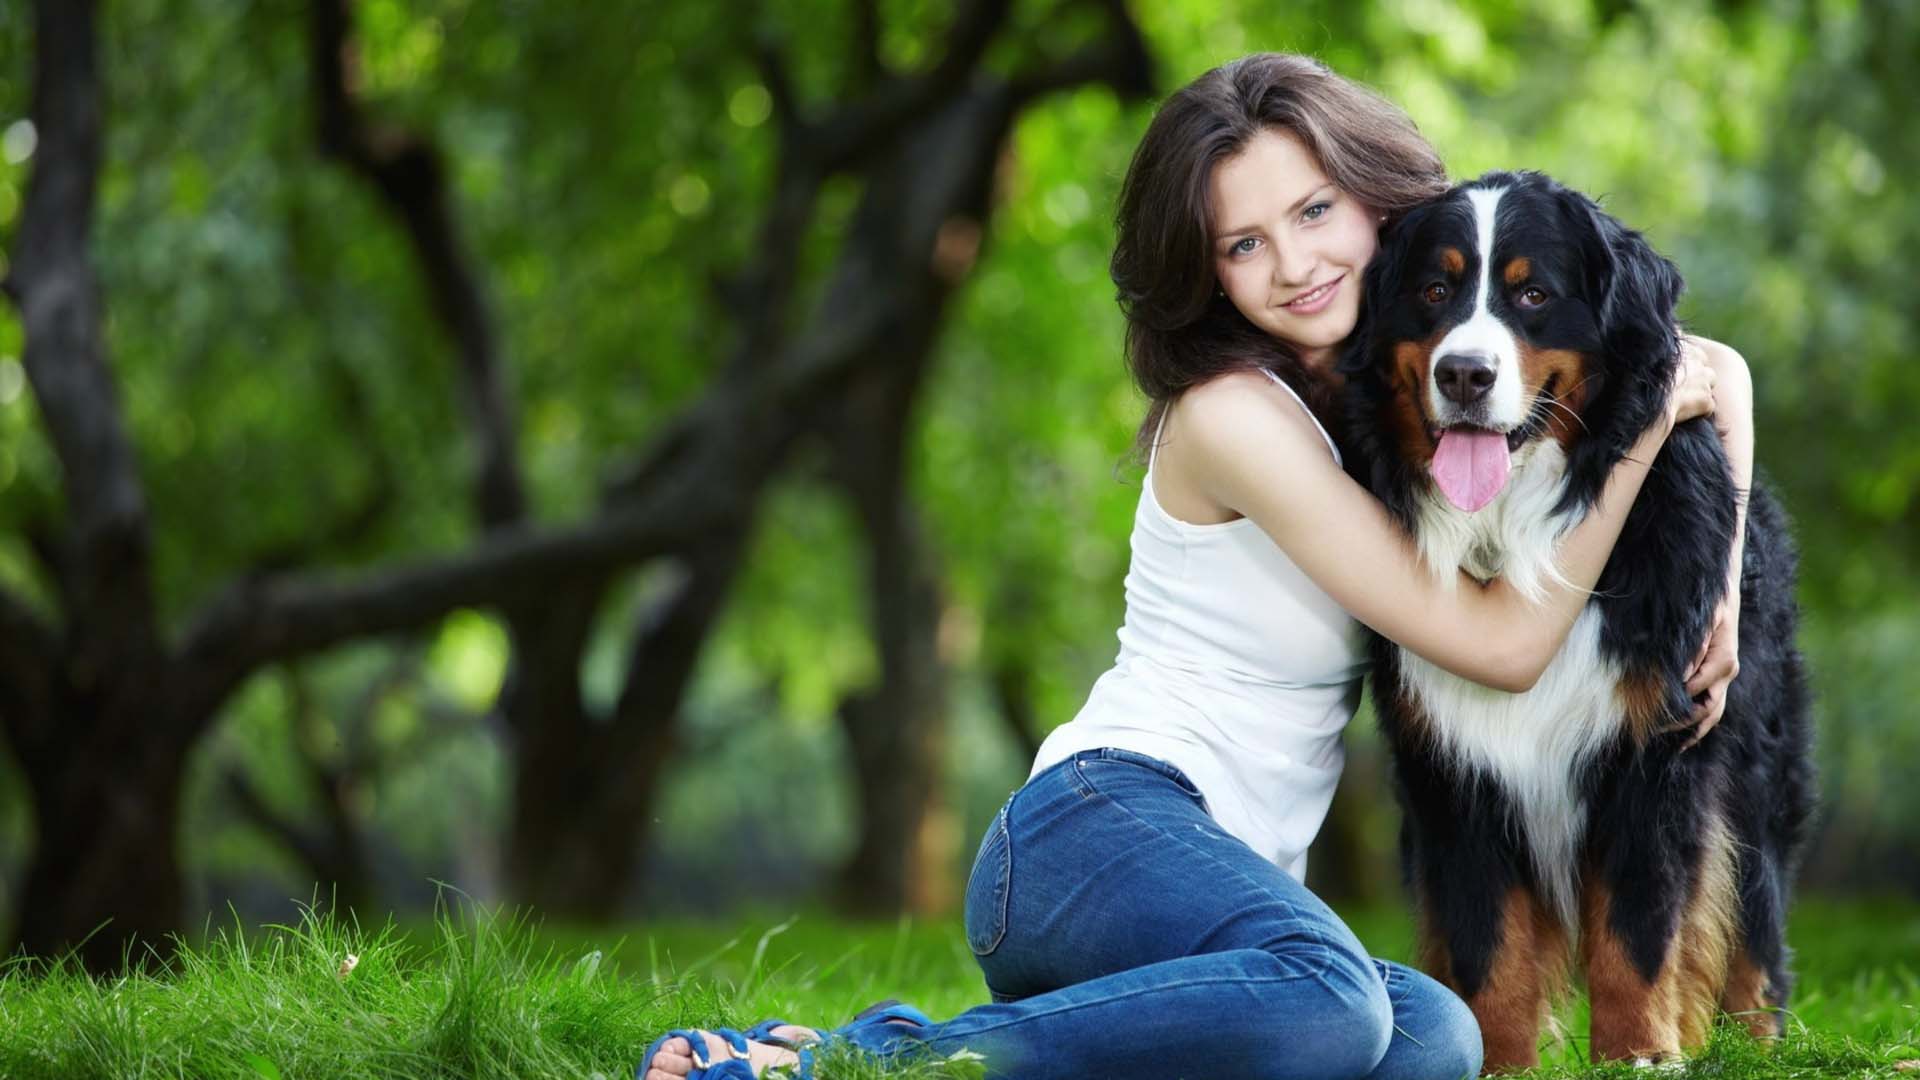 Cute girl and dog at garden